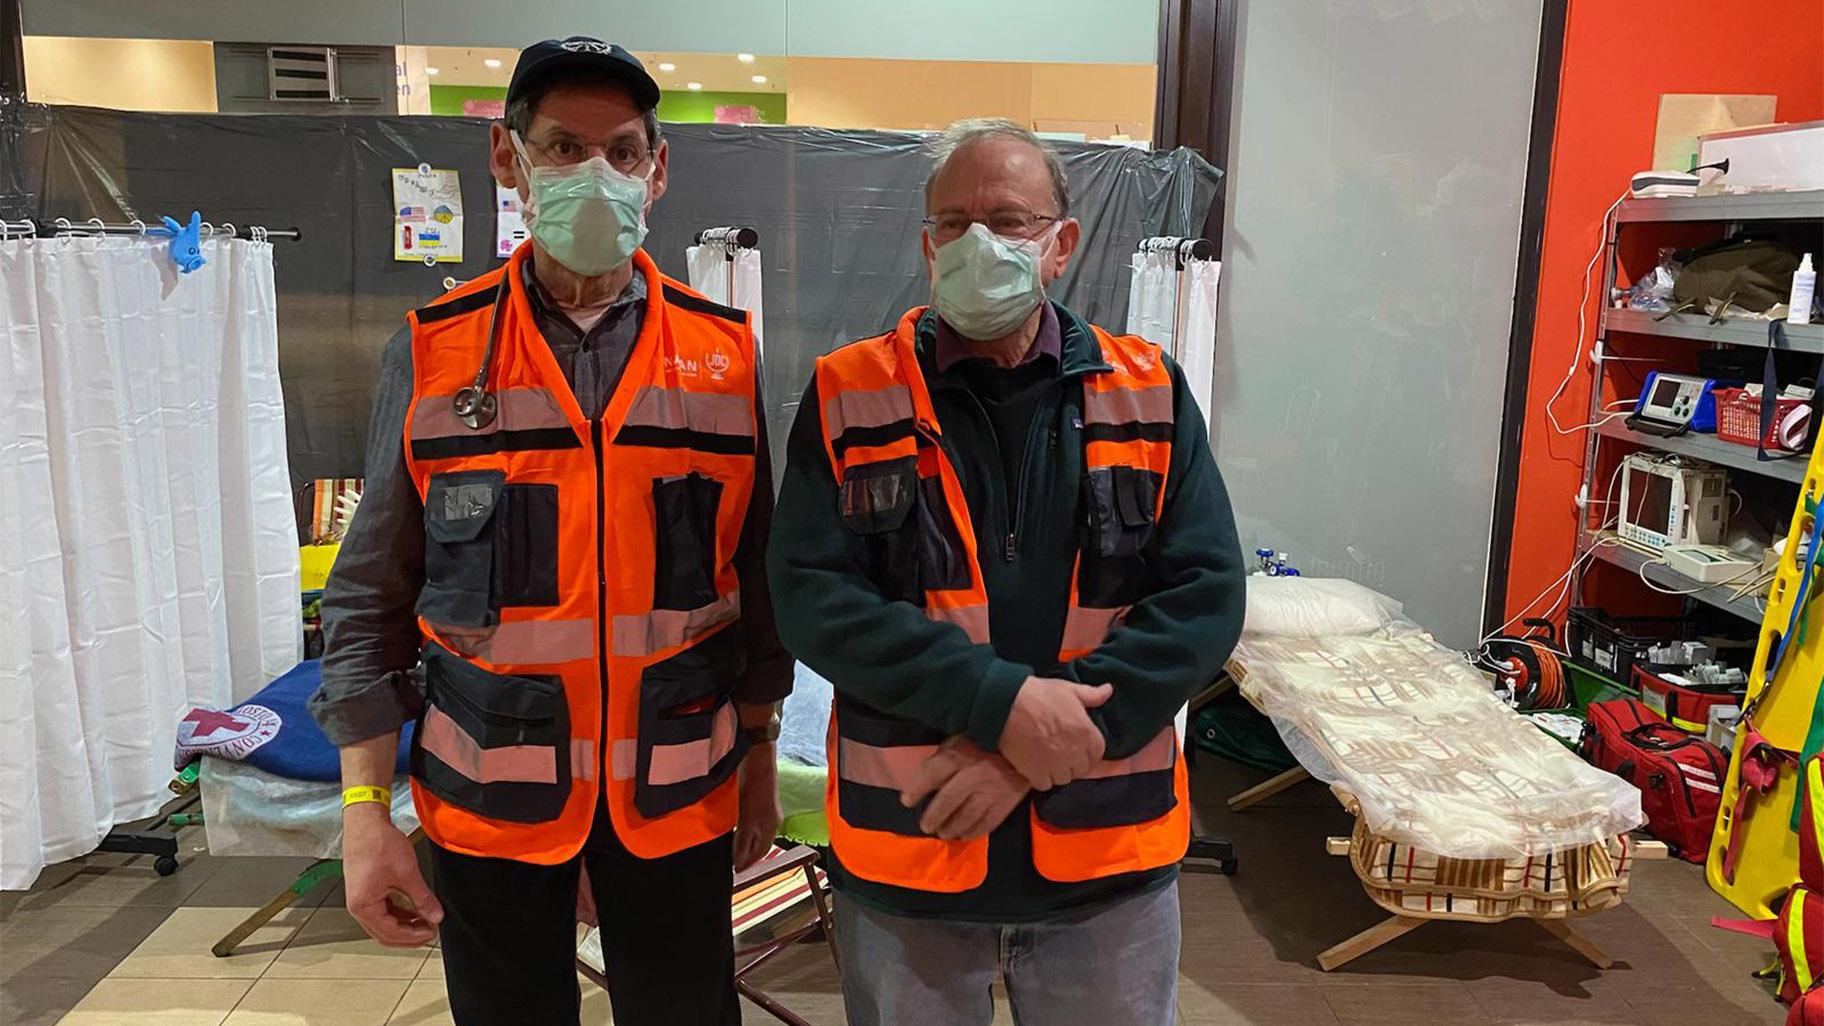 Retired Skokie doctors Dr. David Shapiro and Dr. Avery Hart volunteered with NATAN Worldwide Disaster Relief to travel to Poland and provide aid to Ukrainian refugees. (Courtesy Avery Hart & David Shapiro)